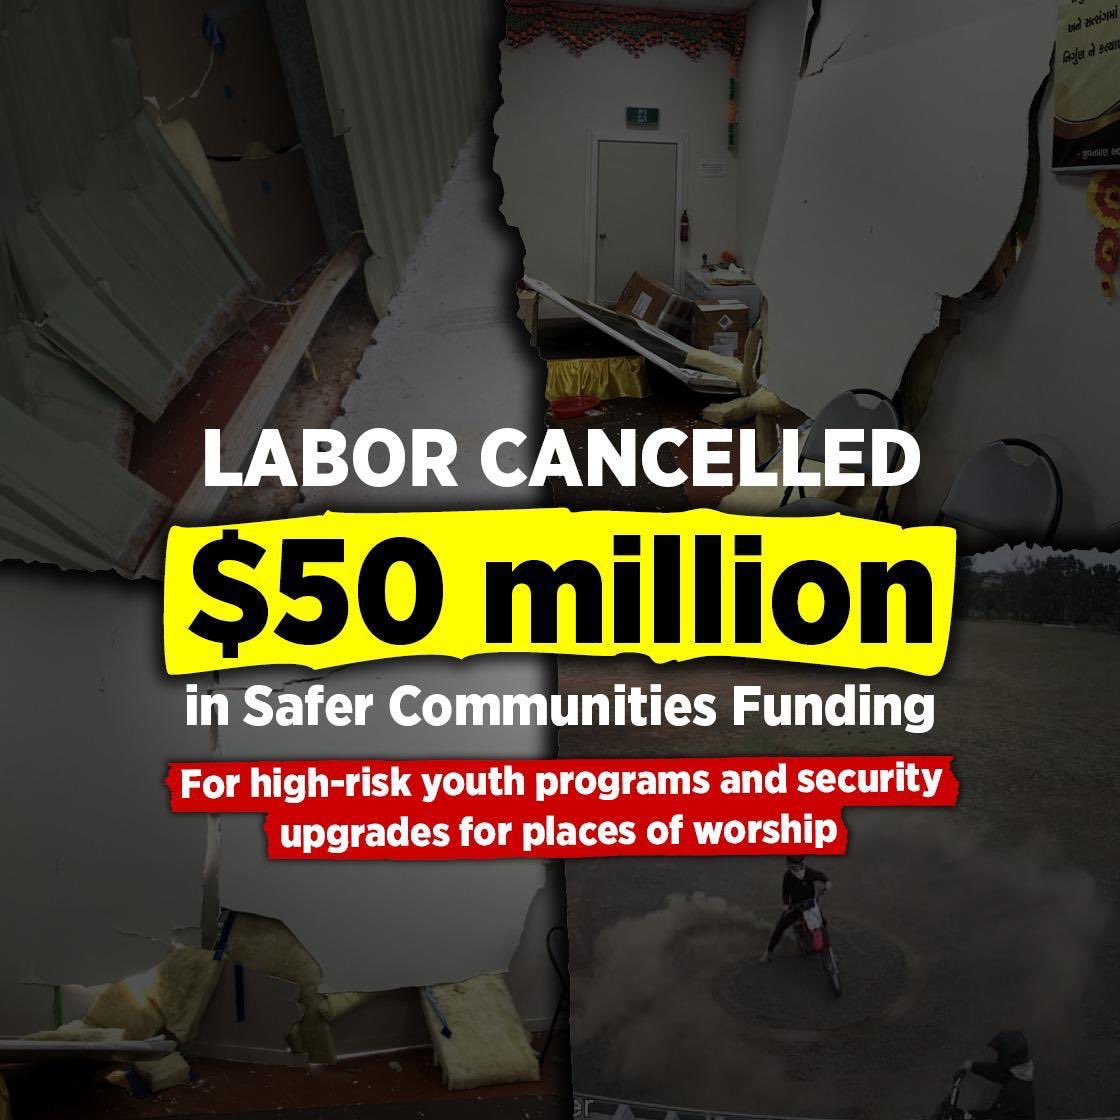 Labor simply doesn't care for vulnerable communities. Everyone has the right to feel safe and to practice their faith in a secure environment. It’s time for Labor to restore $50 million in Safer Communities Funding.